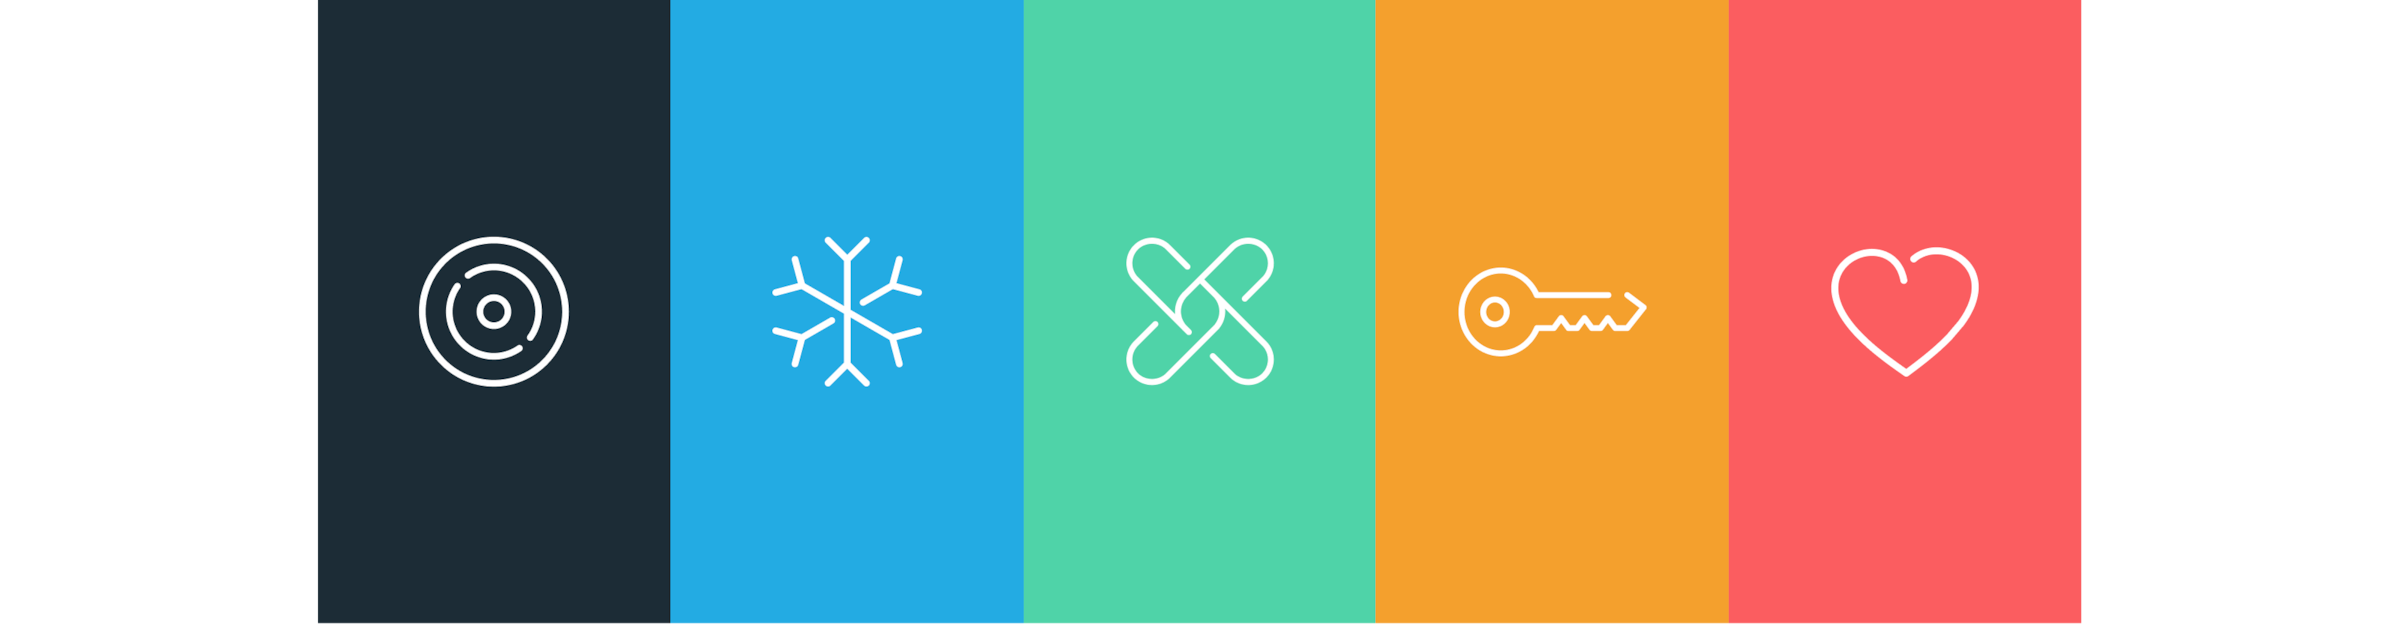 An illustration with icons lists the Xero values of human, challenge, team, ownership and beautiful.